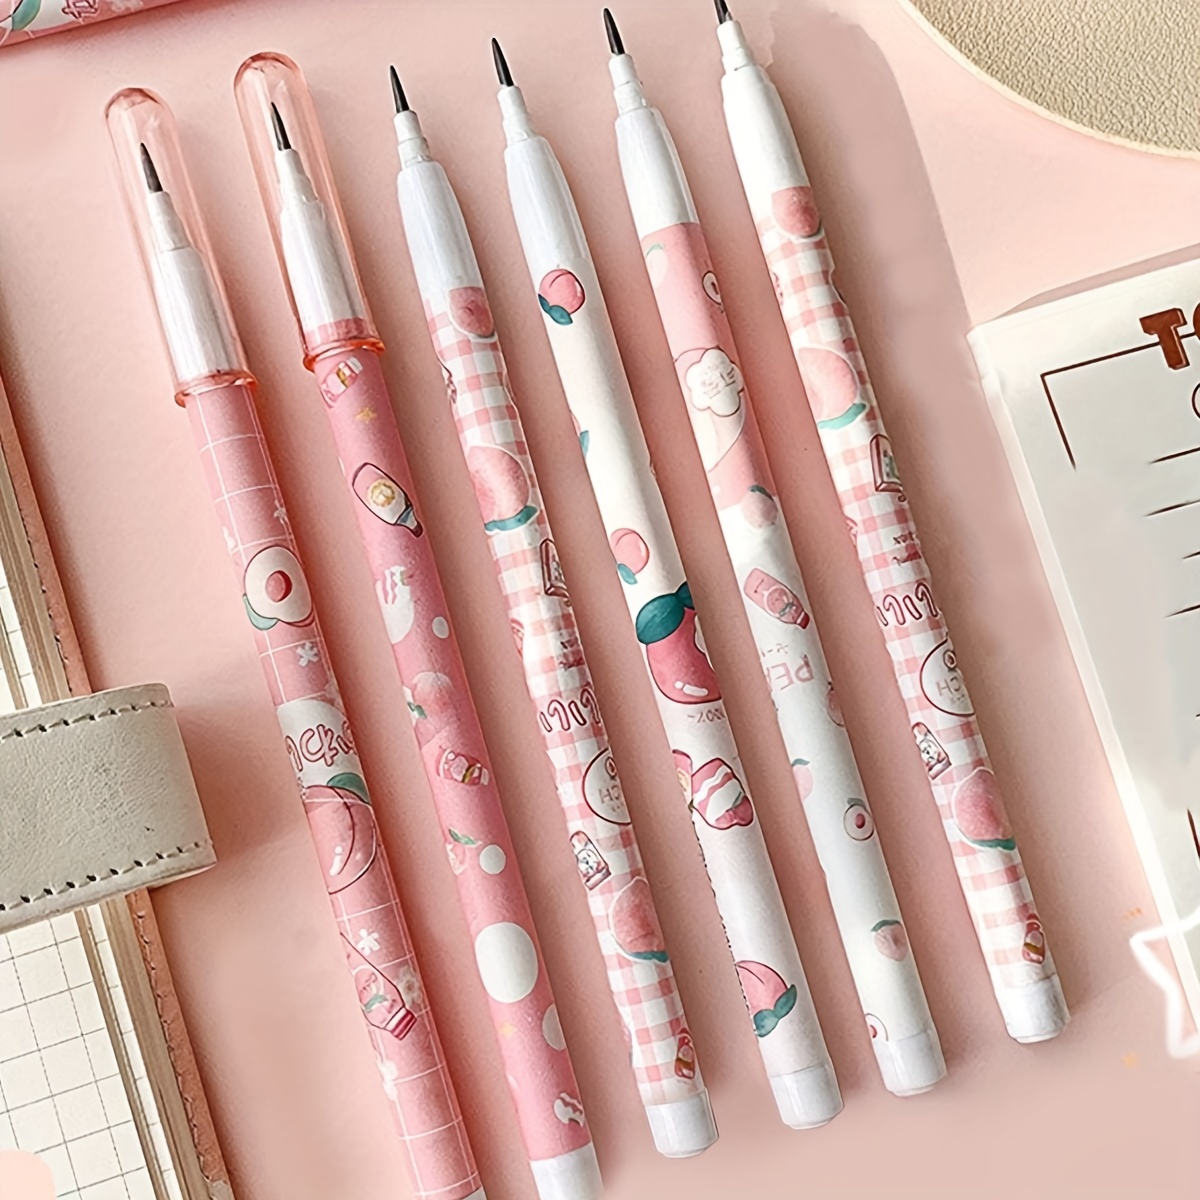 

Upgrade Your Writing Experience With The Random 1 Pink Peach Series Automatic Pencil & Refill Pack!